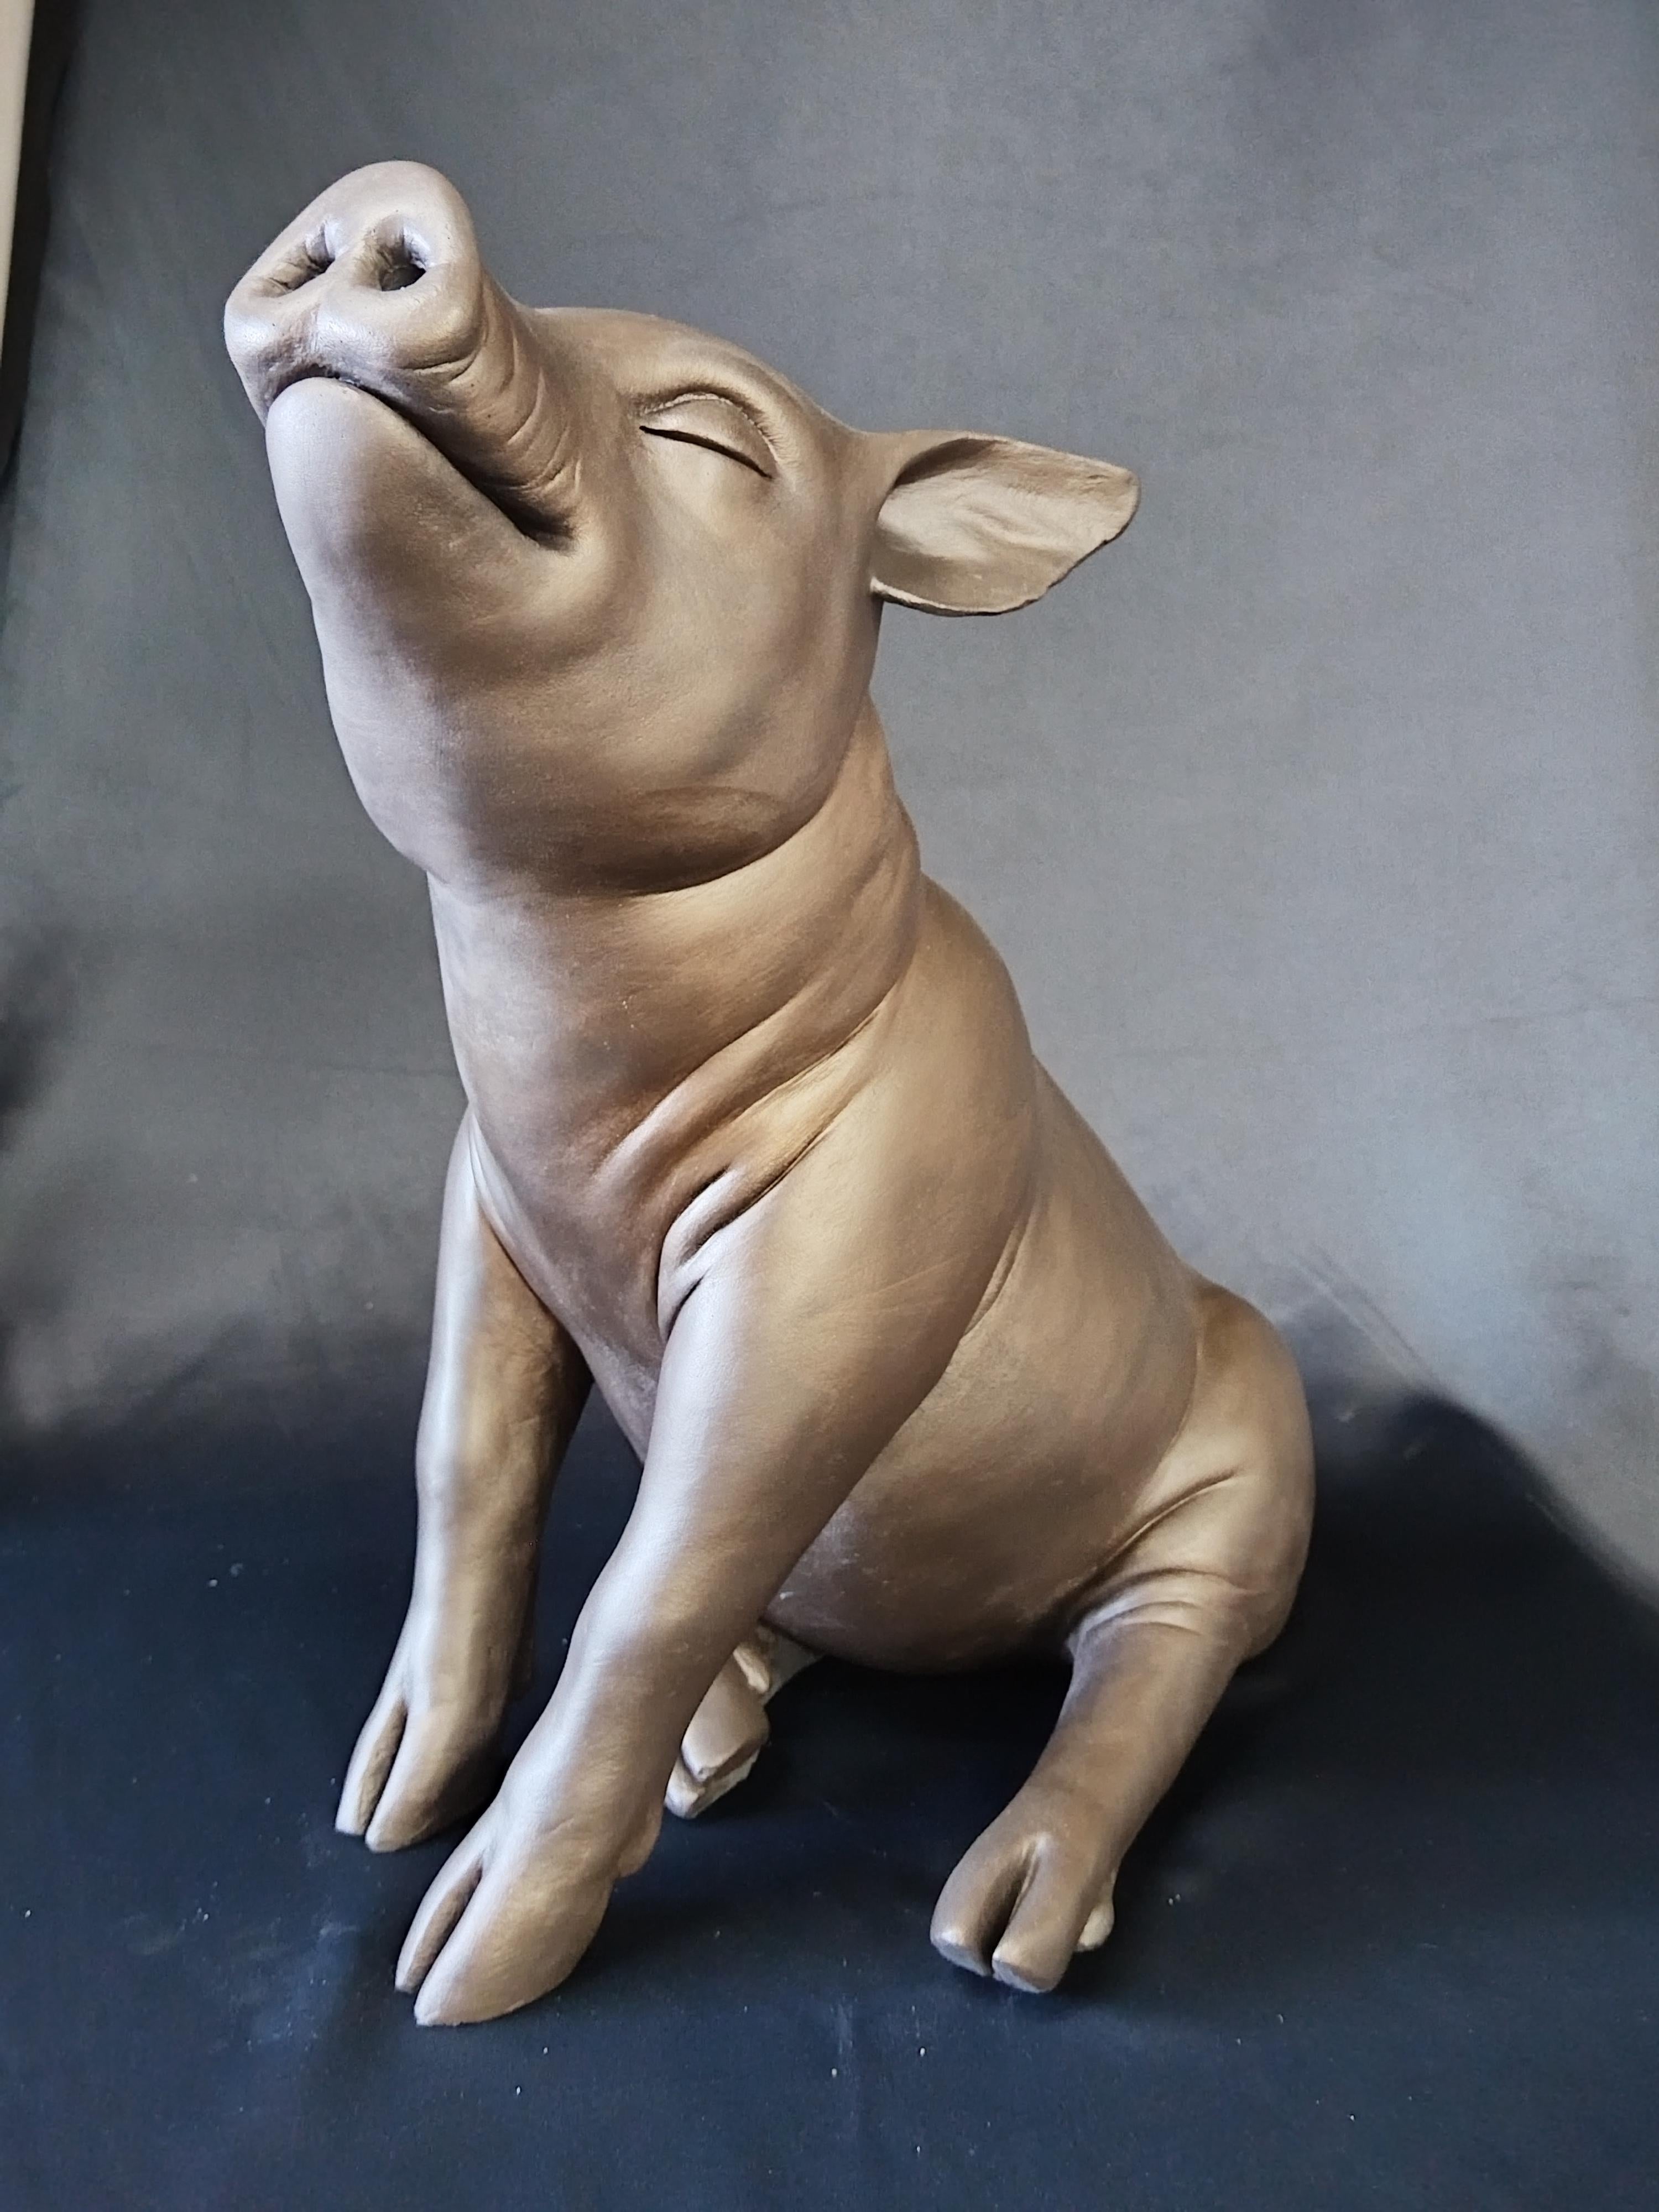 Life Size Limited Edition Ceramic Sculpture 